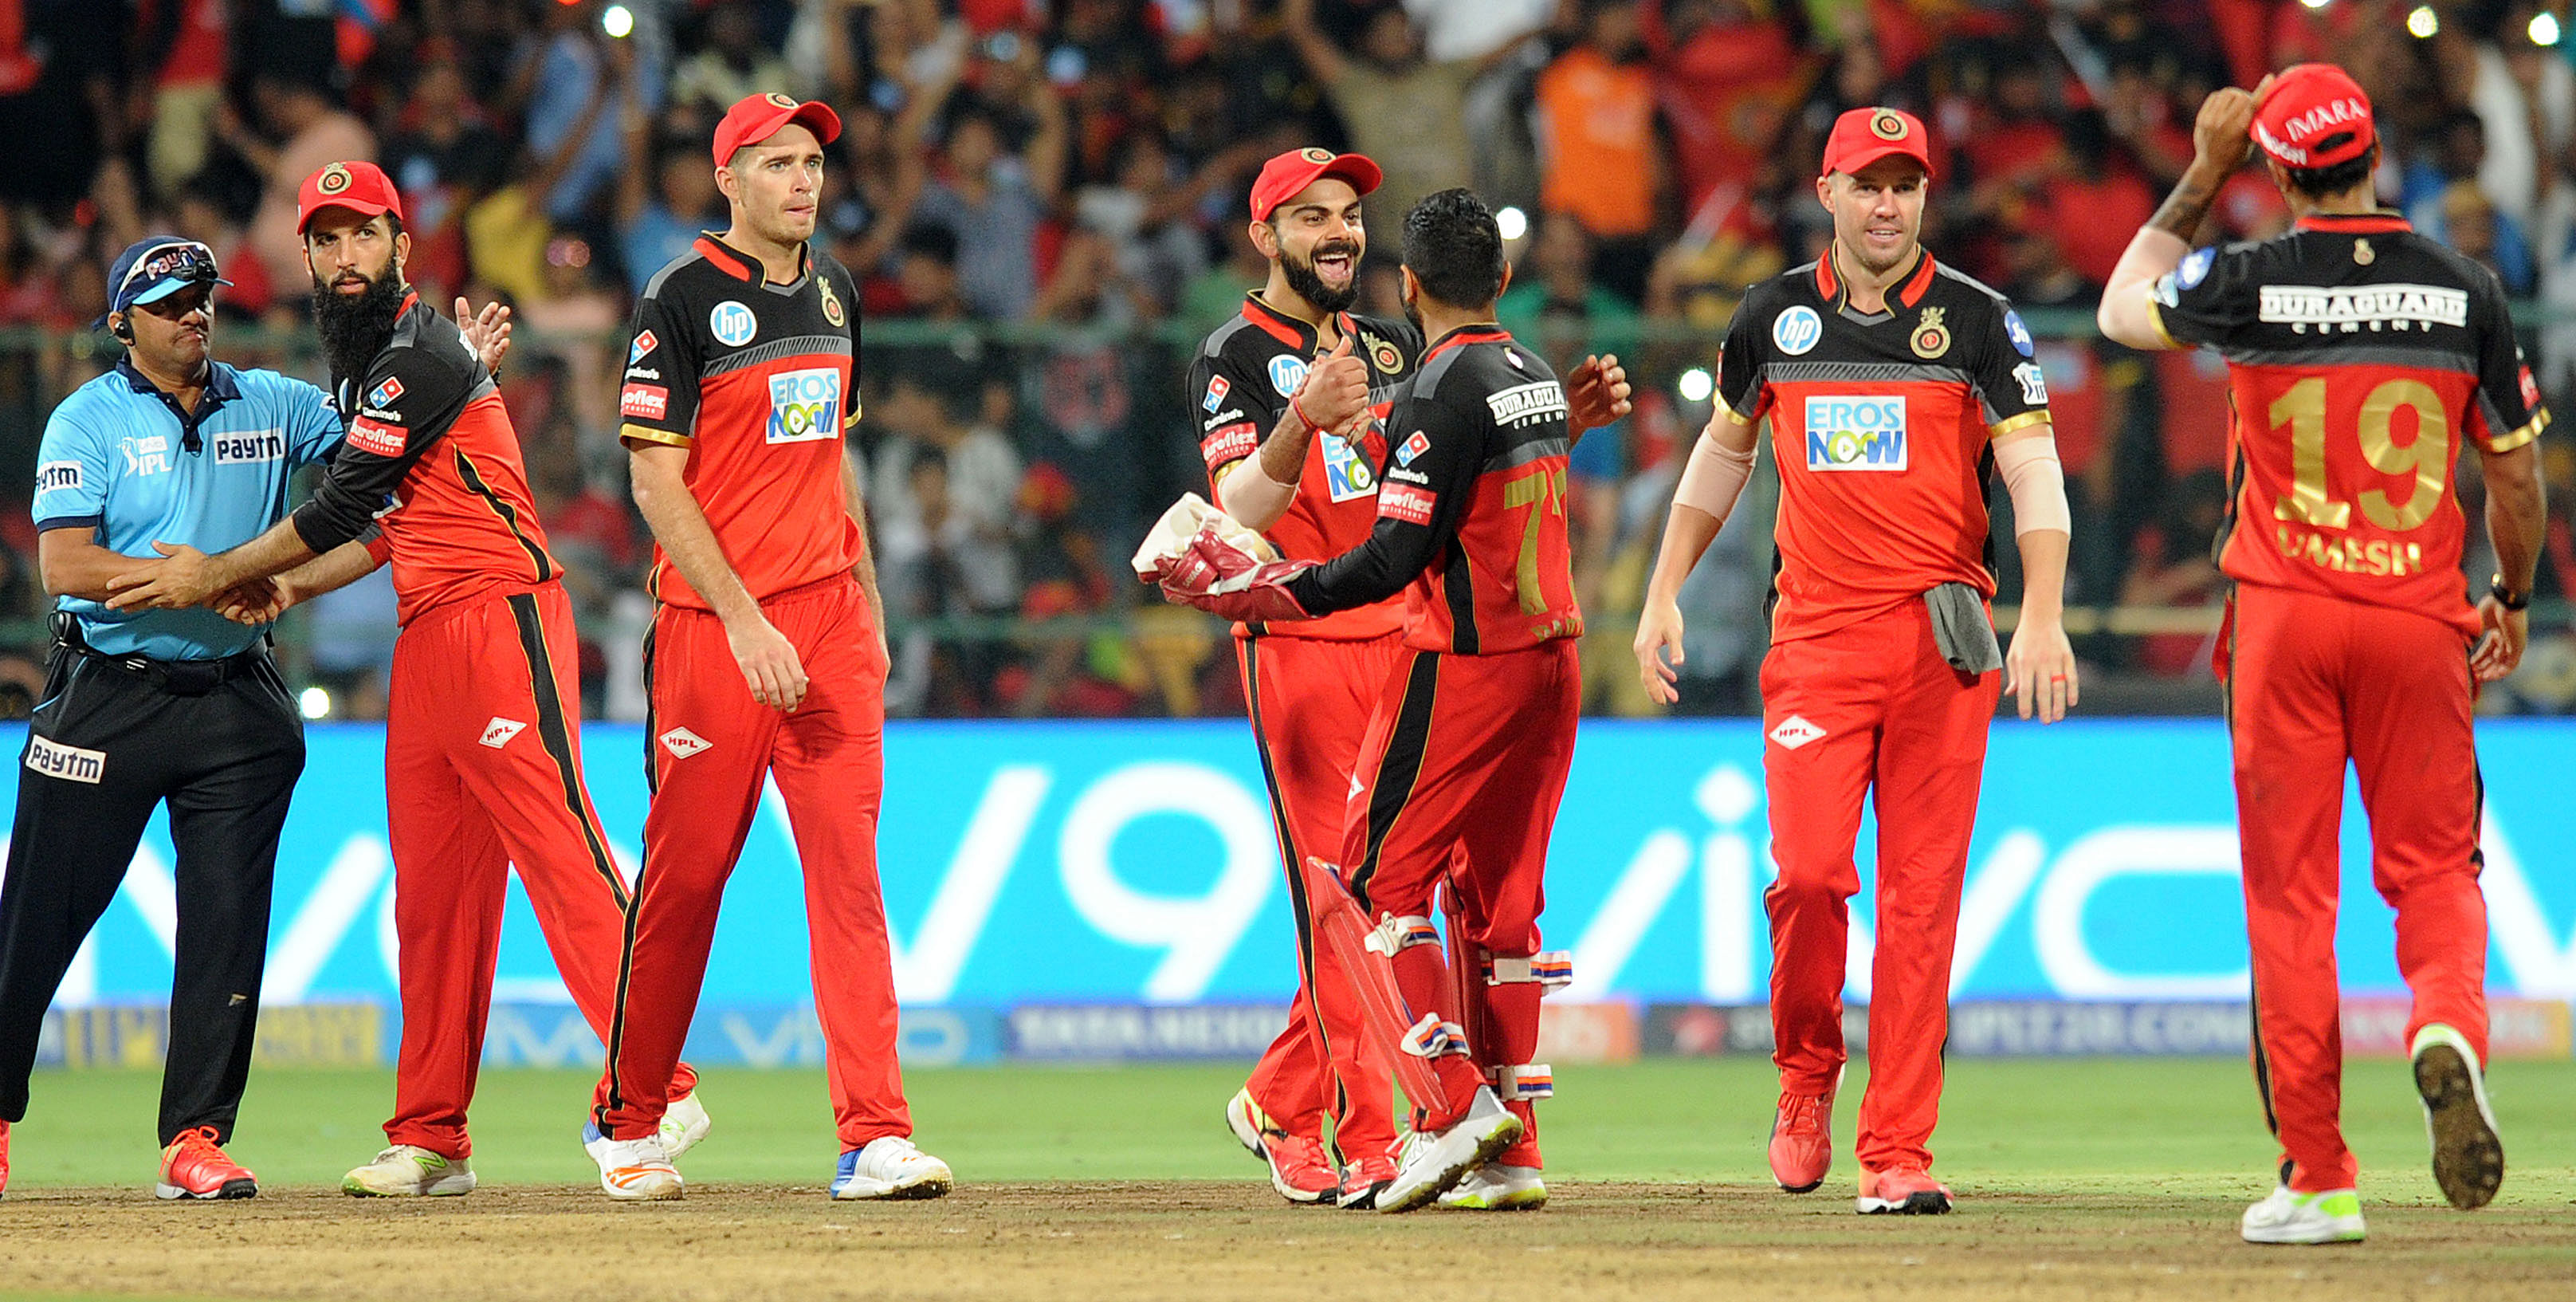 Royal Challengers beat Hyderabad Sunrisers at Chinnaswamy stadium on Thursday. Many fans had to buy tickets in black.